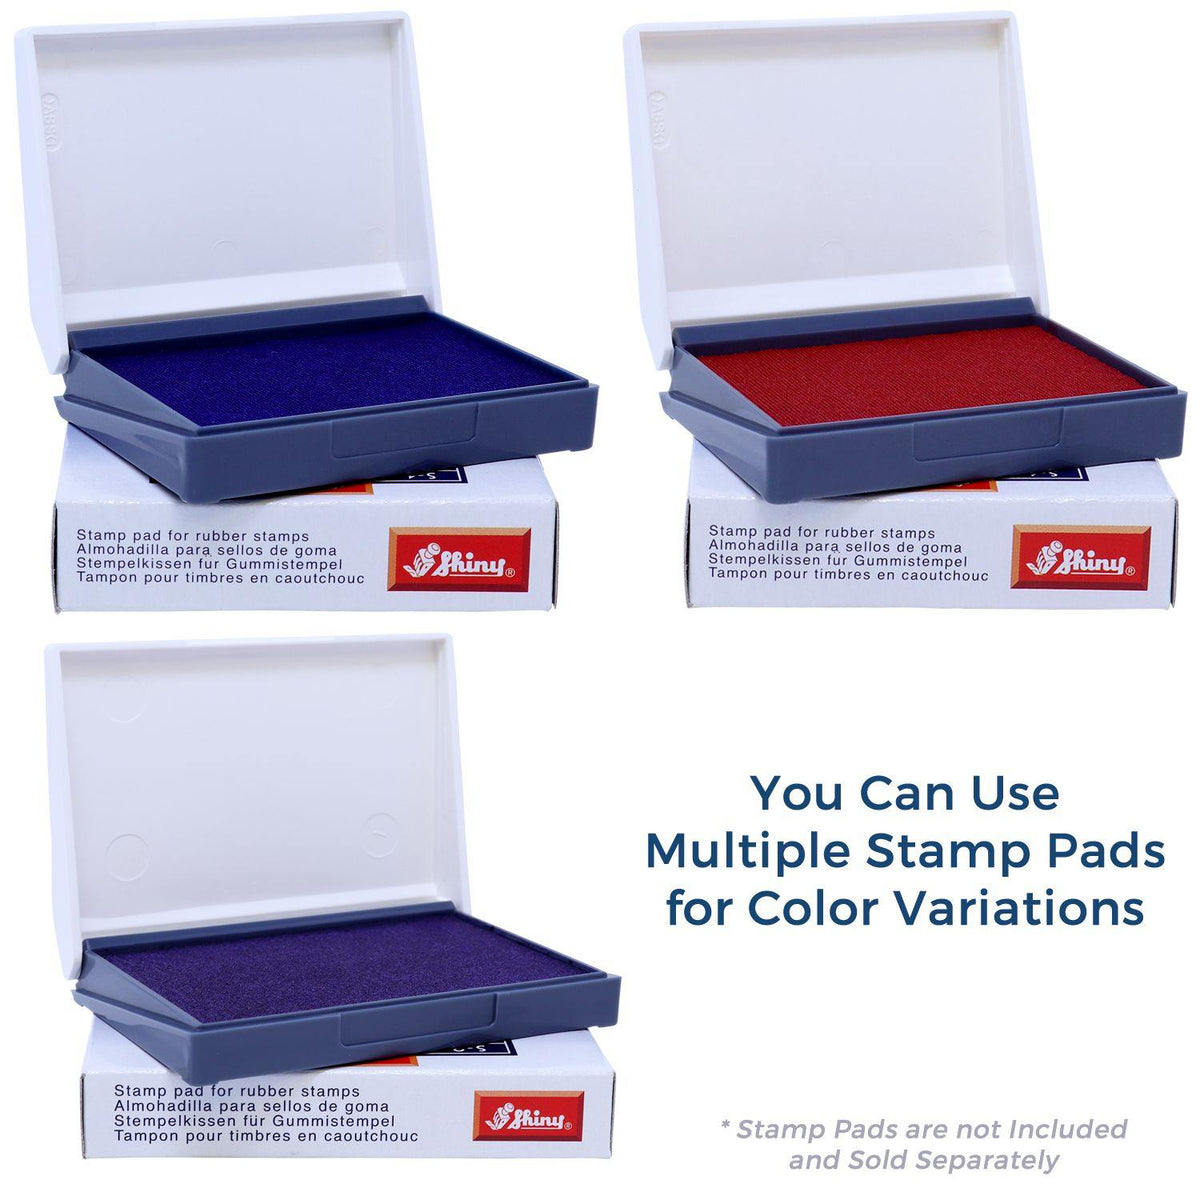 Stamp Pads for Large Original Rubber Stamp Available